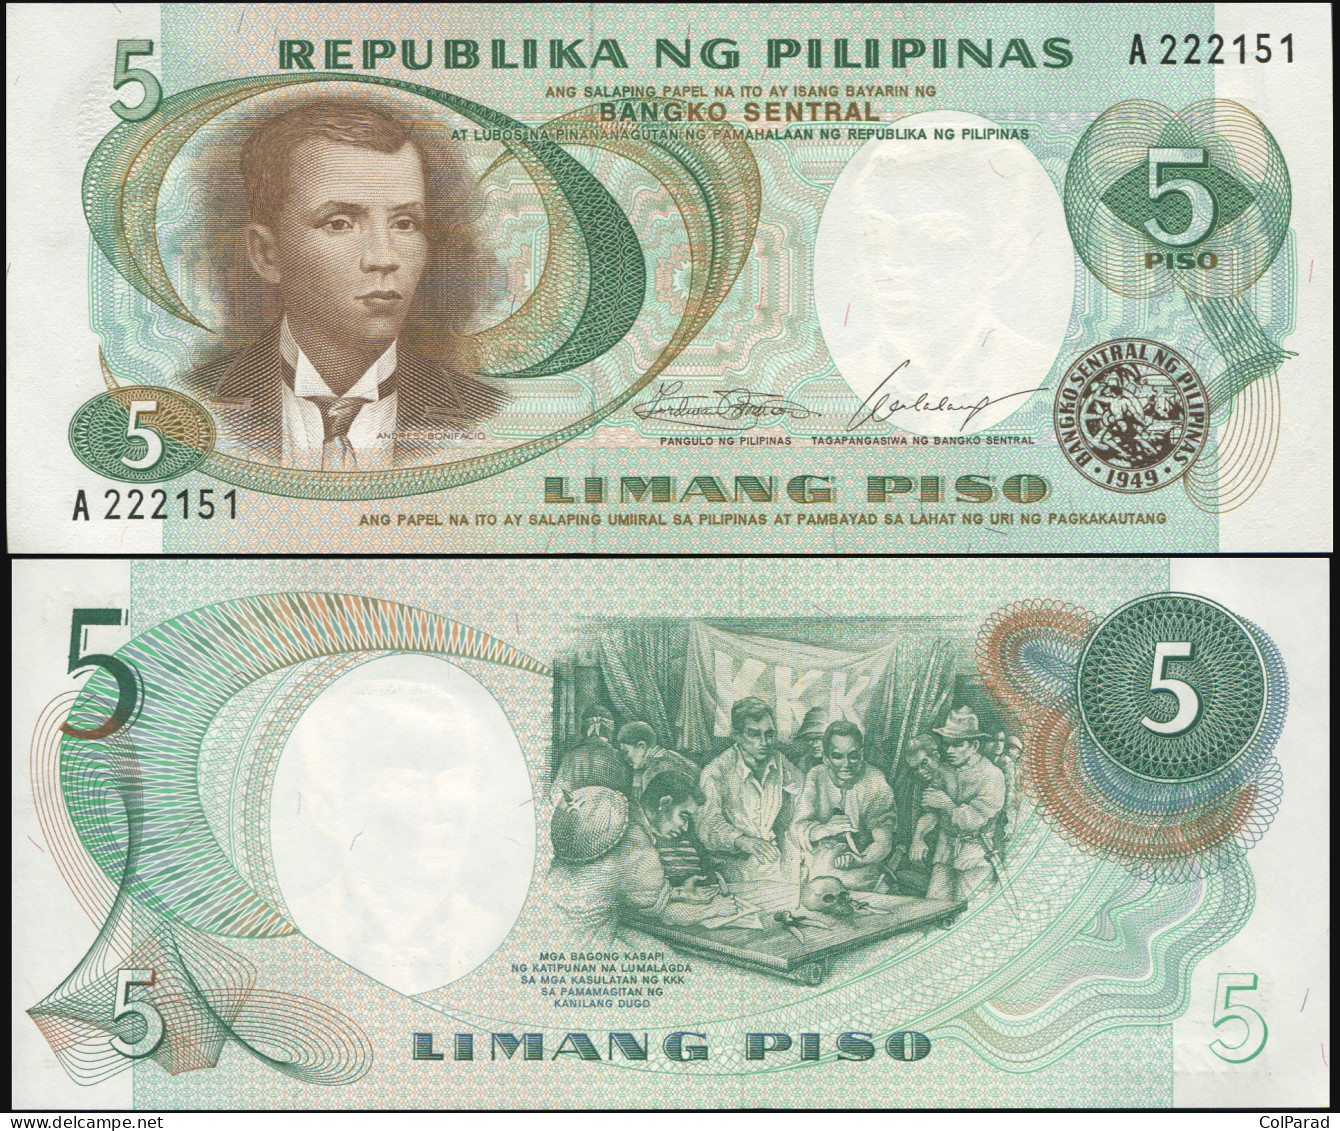 PHILIPPINES 5 PISO - ND (1969) - Paper Unc - P.143a Banknote - Philippinen